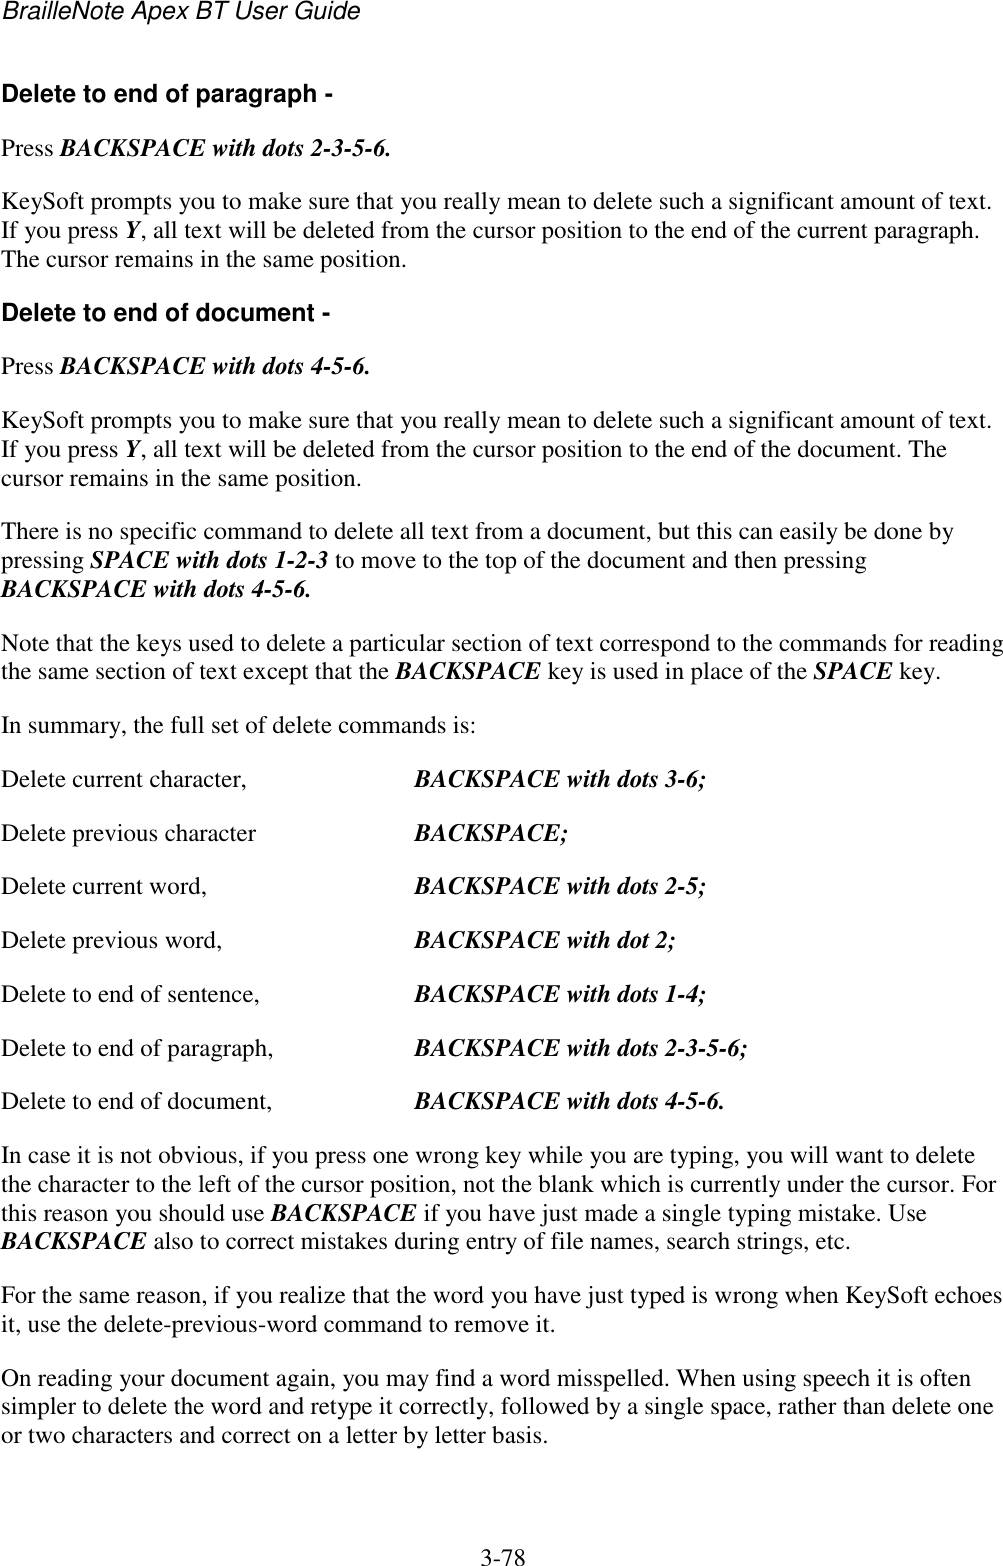 BrailleNote Apex BT User Guide   3-78   Delete to end of paragraph - Press BACKSPACE with dots 2-3-5-6. KeySoft prompts you to make sure that you really mean to delete such a significant amount of text. If you press Y, all text will be deleted from the cursor position to the end of the current paragraph. The cursor remains in the same position. Delete to end of document - Press BACKSPACE with dots 4-5-6. KeySoft prompts you to make sure that you really mean to delete such a significant amount of text. If you press Y, all text will be deleted from the cursor position to the end of the document. The cursor remains in the same position. There is no specific command to delete all text from a document, but this can easily be done by pressing SPACE with dots 1-2-3 to move to the top of the document and then pressing BACKSPACE with dots 4-5-6. Note that the keys used to delete a particular section of text correspond to the commands for reading the same section of text except that the BACKSPACE key is used in place of the SPACE key. In summary, the full set of delete commands is: Delete current character,  BACKSPACE with dots 3-6; Delete previous character  BACKSPACE; Delete current word,  BACKSPACE with dots 2-5; Delete previous word,  BACKSPACE with dot 2; Delete to end of sentence,  BACKSPACE with dots 1-4; Delete to end of paragraph,  BACKSPACE with dots 2-3-5-6; Delete to end of document,  BACKSPACE with dots 4-5-6. In case it is not obvious, if you press one wrong key while you are typing, you will want to delete the character to the left of the cursor position, not the blank which is currently under the cursor. For this reason you should use BACKSPACE if you have just made a single typing mistake. Use BACKSPACE also to correct mistakes during entry of file names, search strings, etc. For the same reason, if you realize that the word you have just typed is wrong when KeySoft echoes it, use the delete-previous-word command to remove it. On reading your document again, you may find a word misspelled. When using speech it is often simpler to delete the word and retype it correctly, followed by a single space, rather than delete one or two characters and correct on a letter by letter basis.   